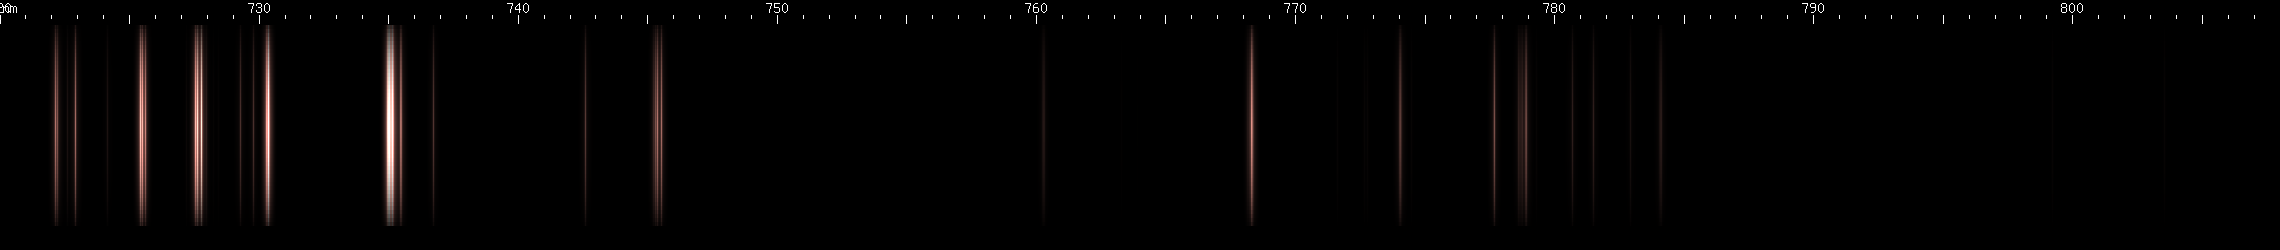 Spectral lines of Indium.